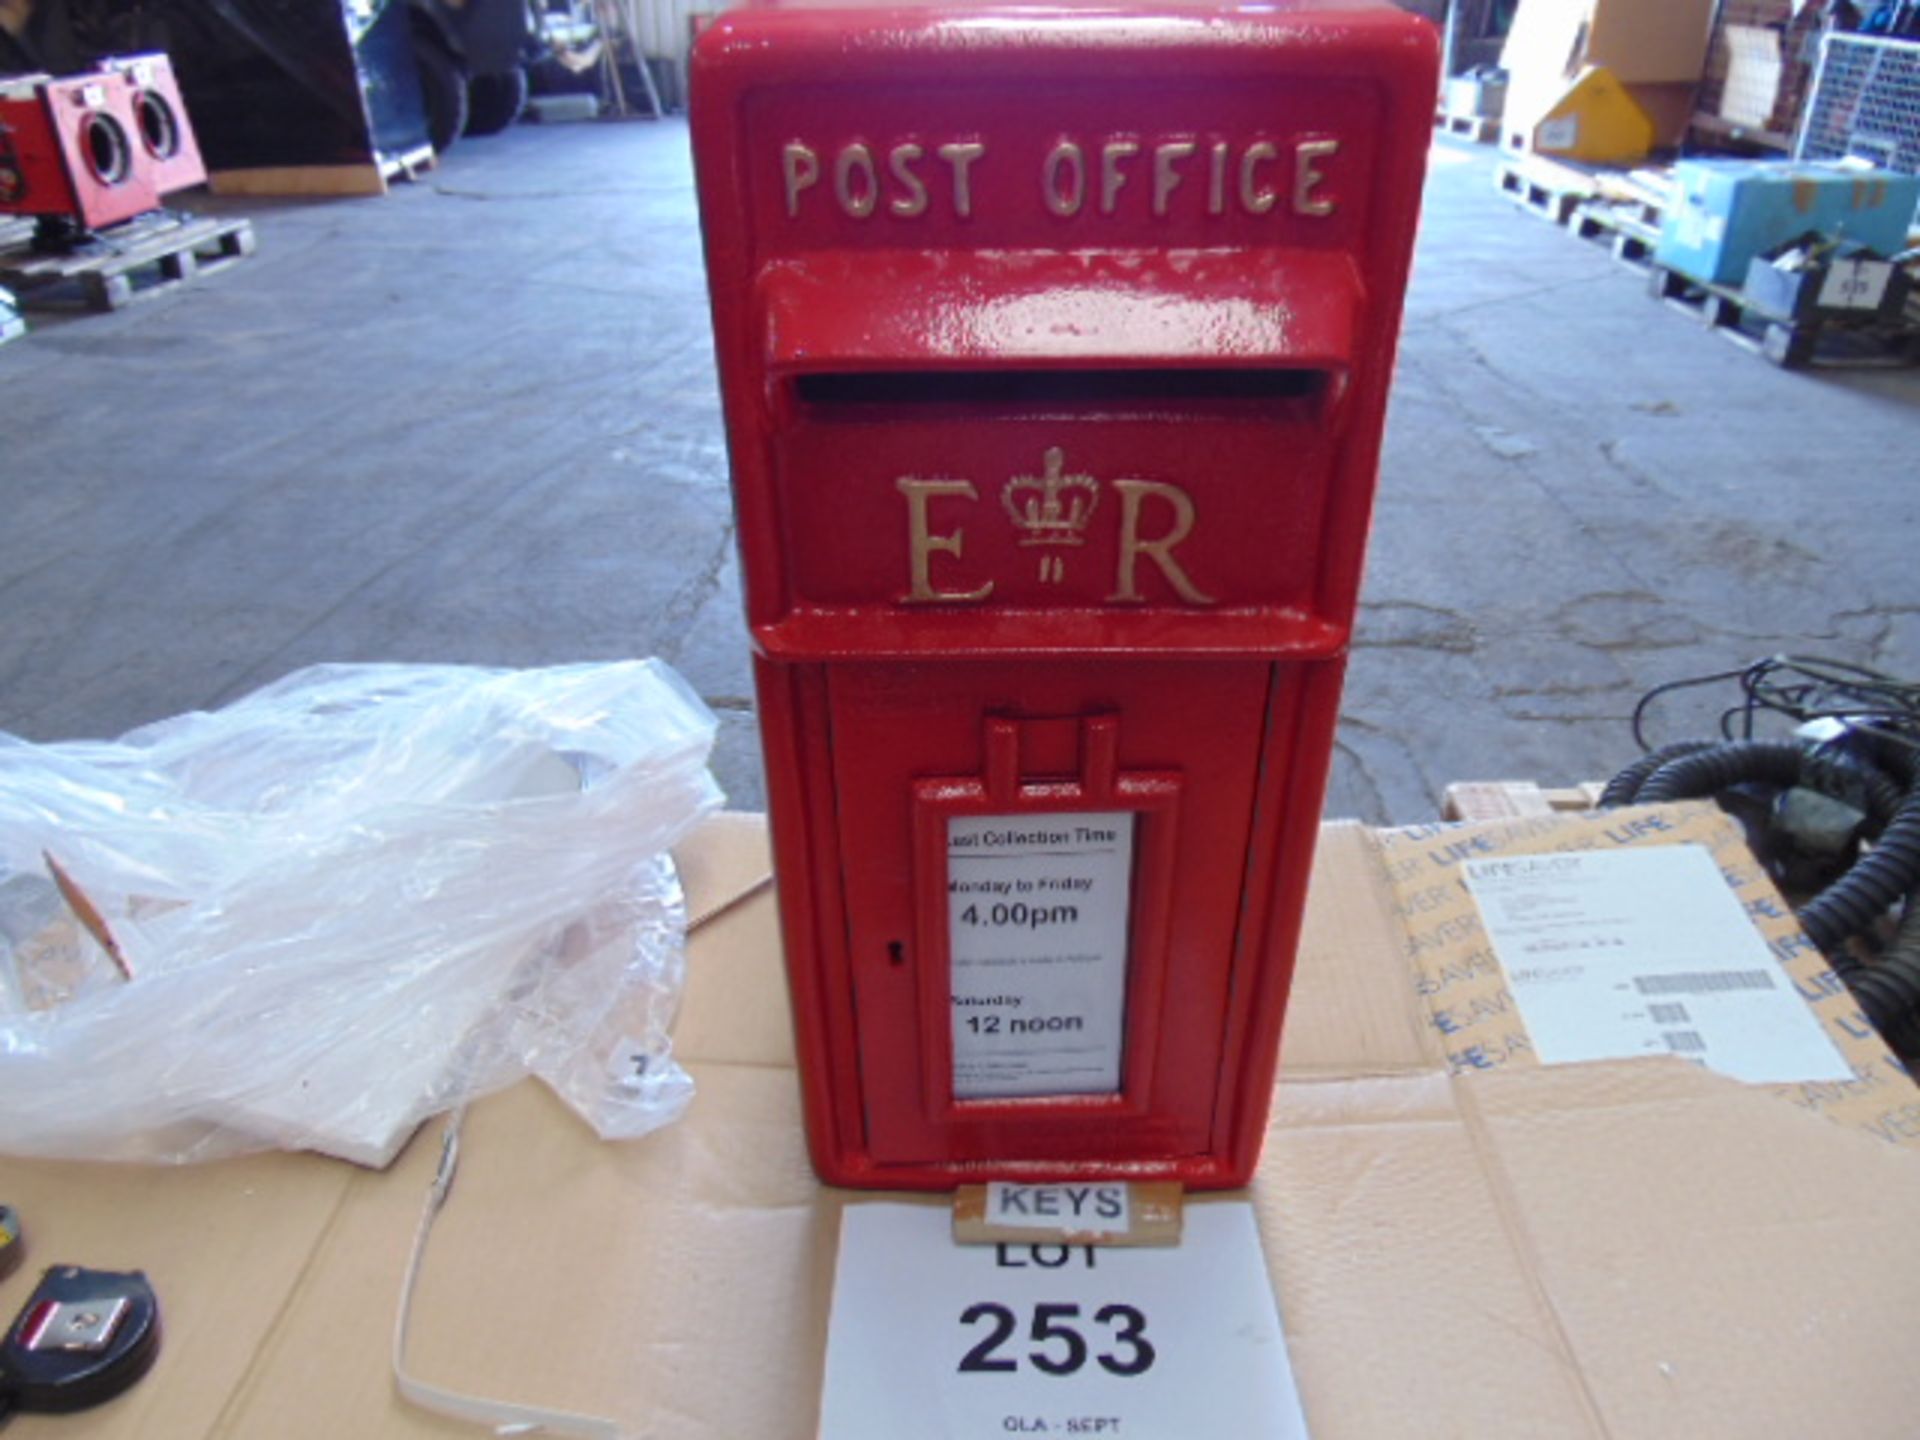 ER RED POST BOX C/W KEYS, COLLECTION TIMES, ETC - Image 8 of 10